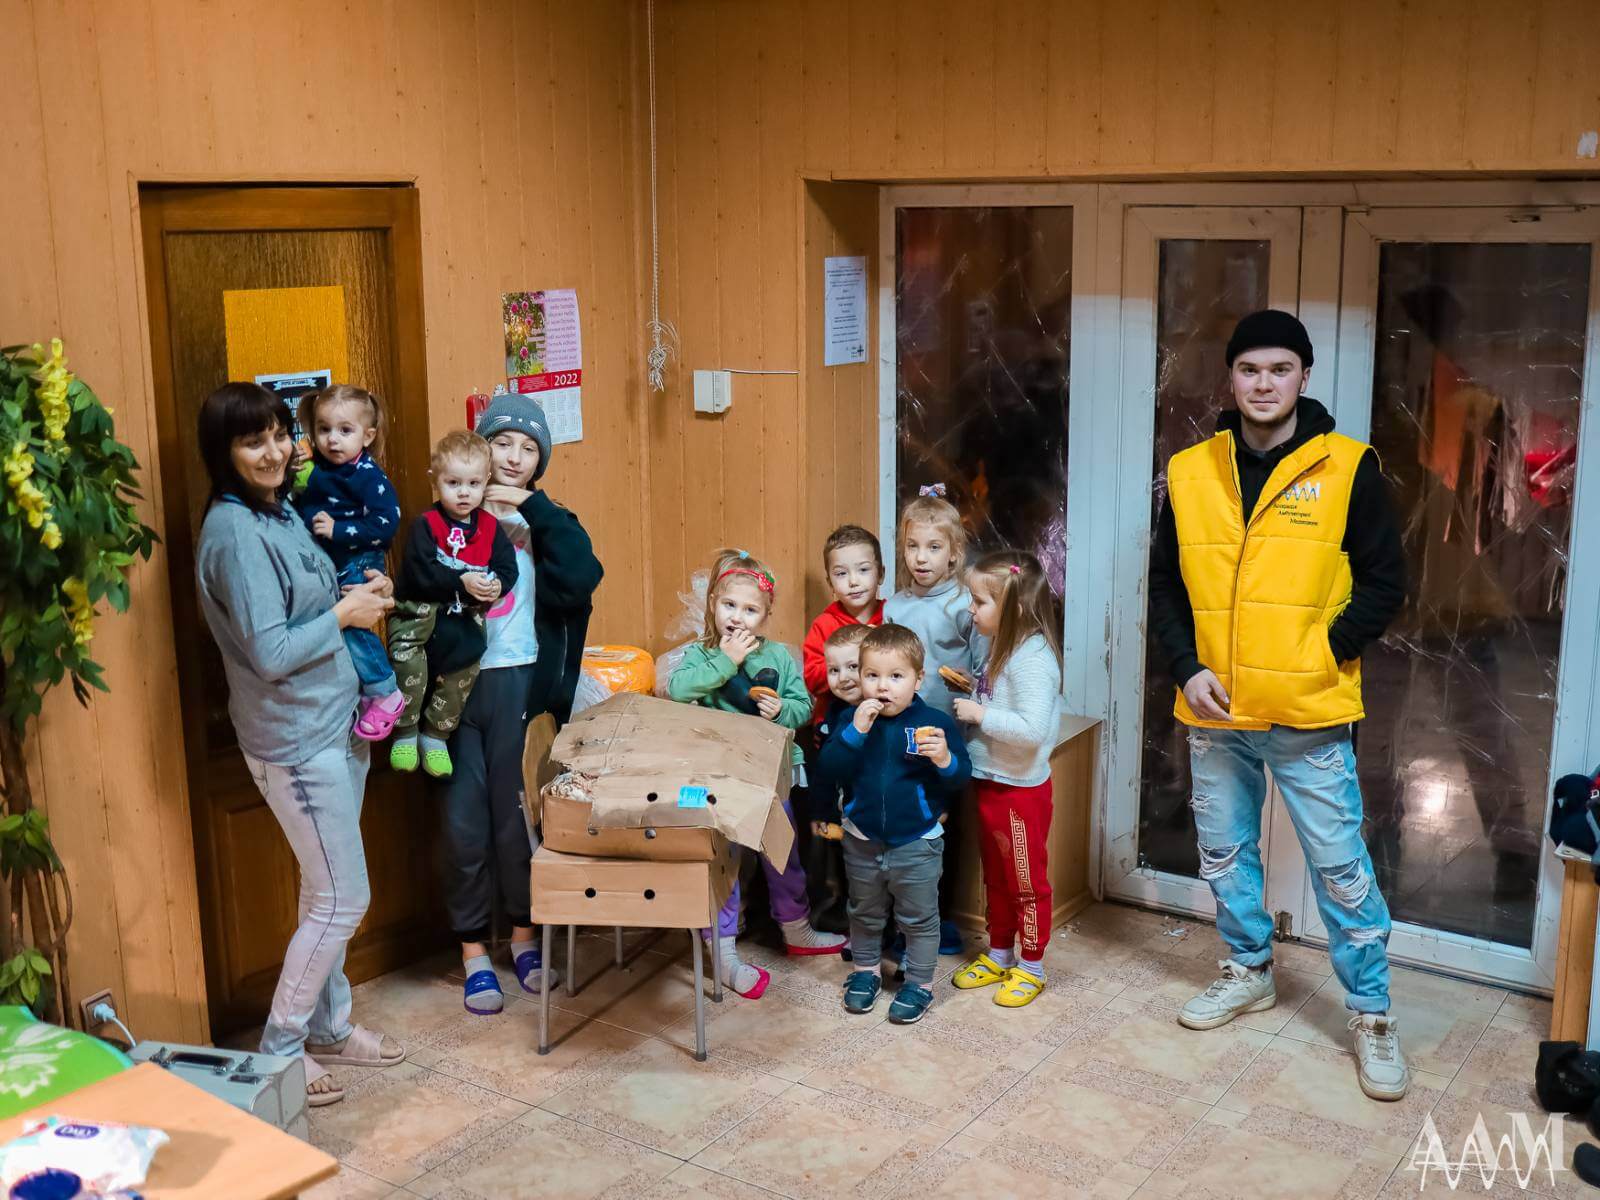 HUMANITARIAN ASSISTANCE: DIM MOTHER AND CHILDREN – PRODUCTS FOOD: Ukrainian Association of Ambulatory Physicians